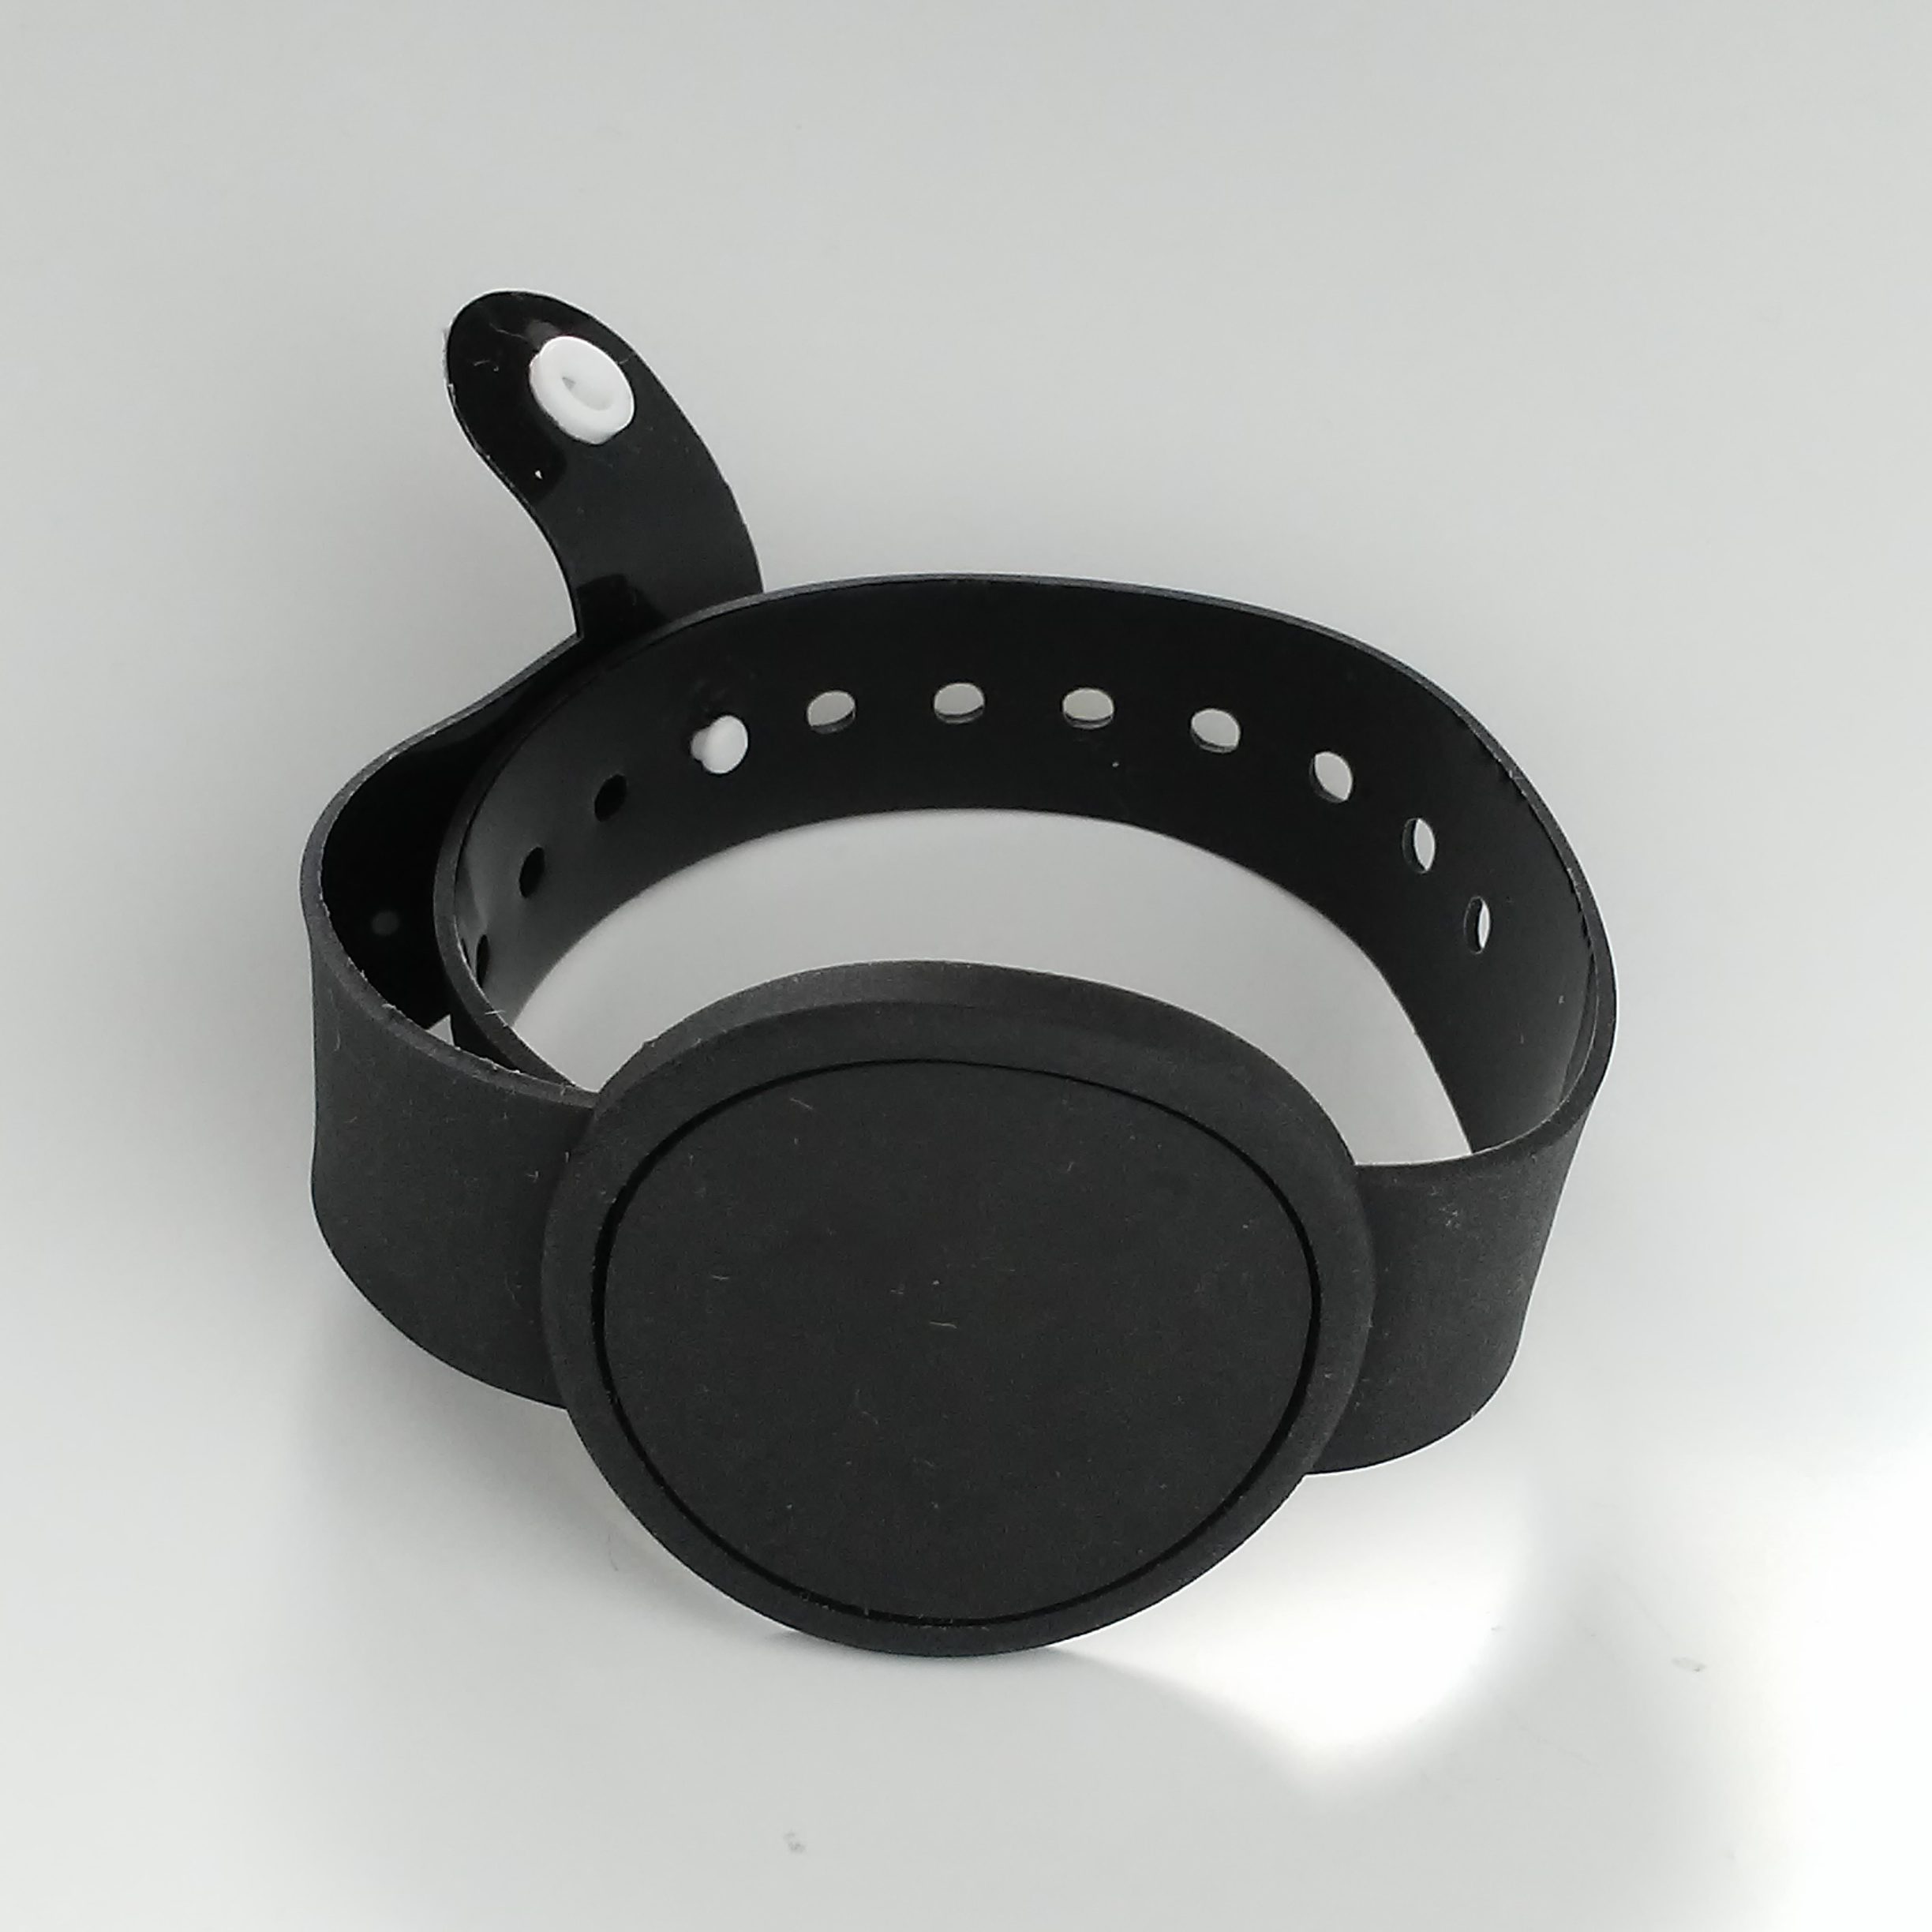 This NFC silicone wristbane can be adjusted and locked.